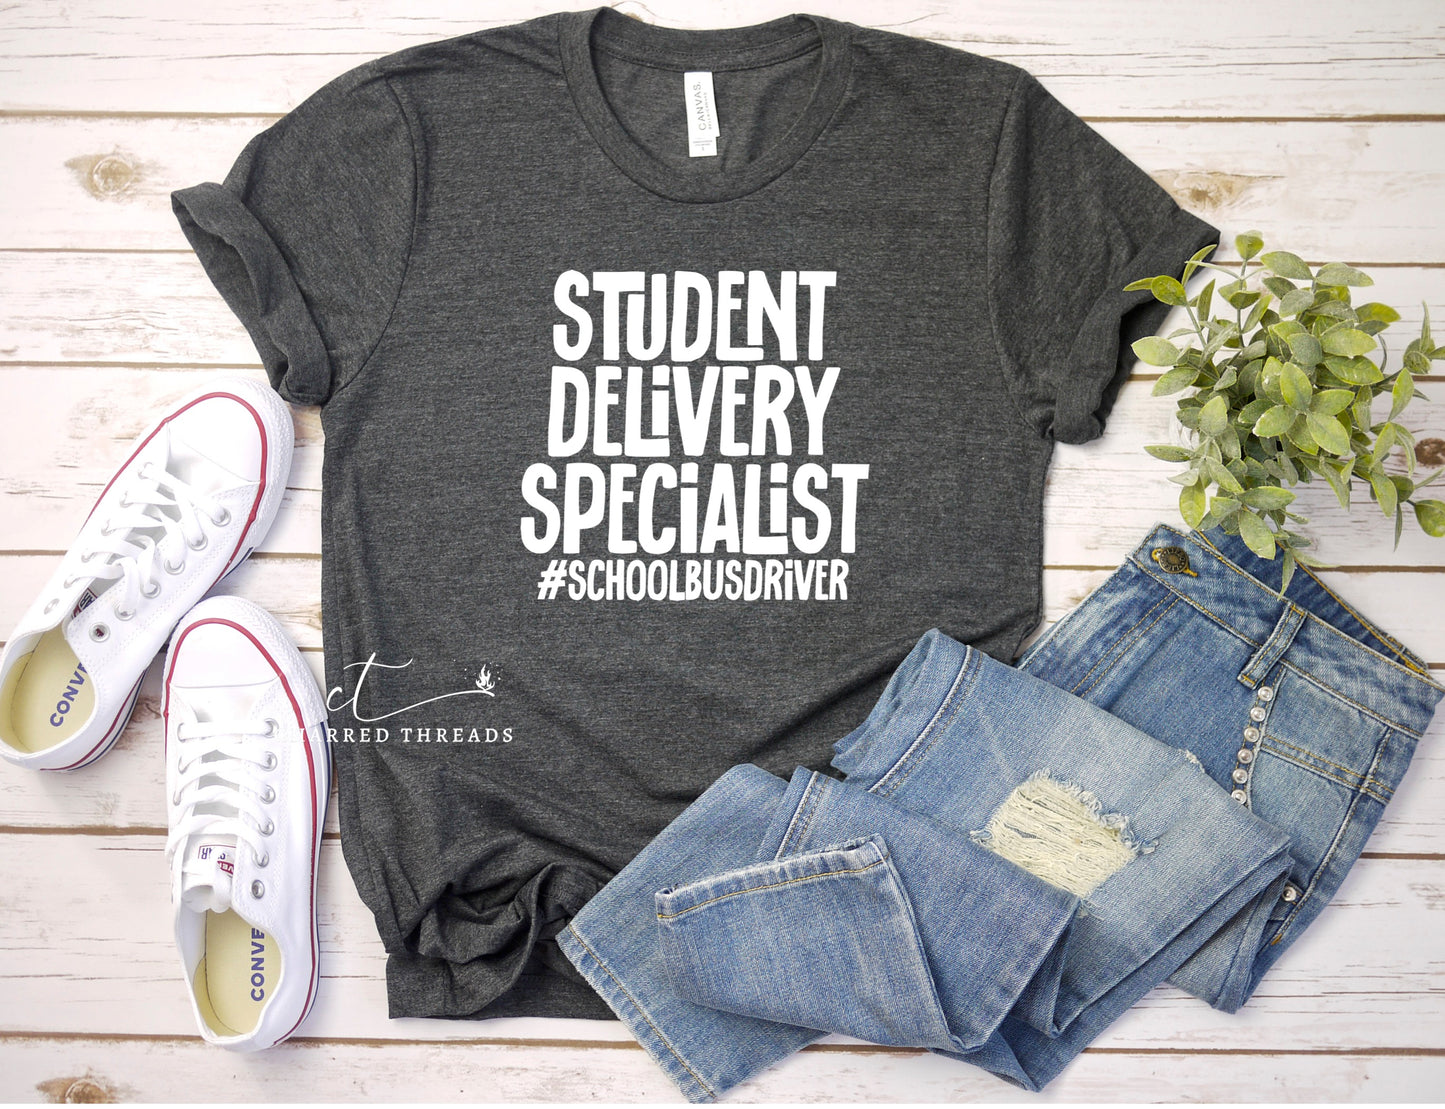 Student Delivery Specialist #schoolbusdriver Short Sleeve Shirt